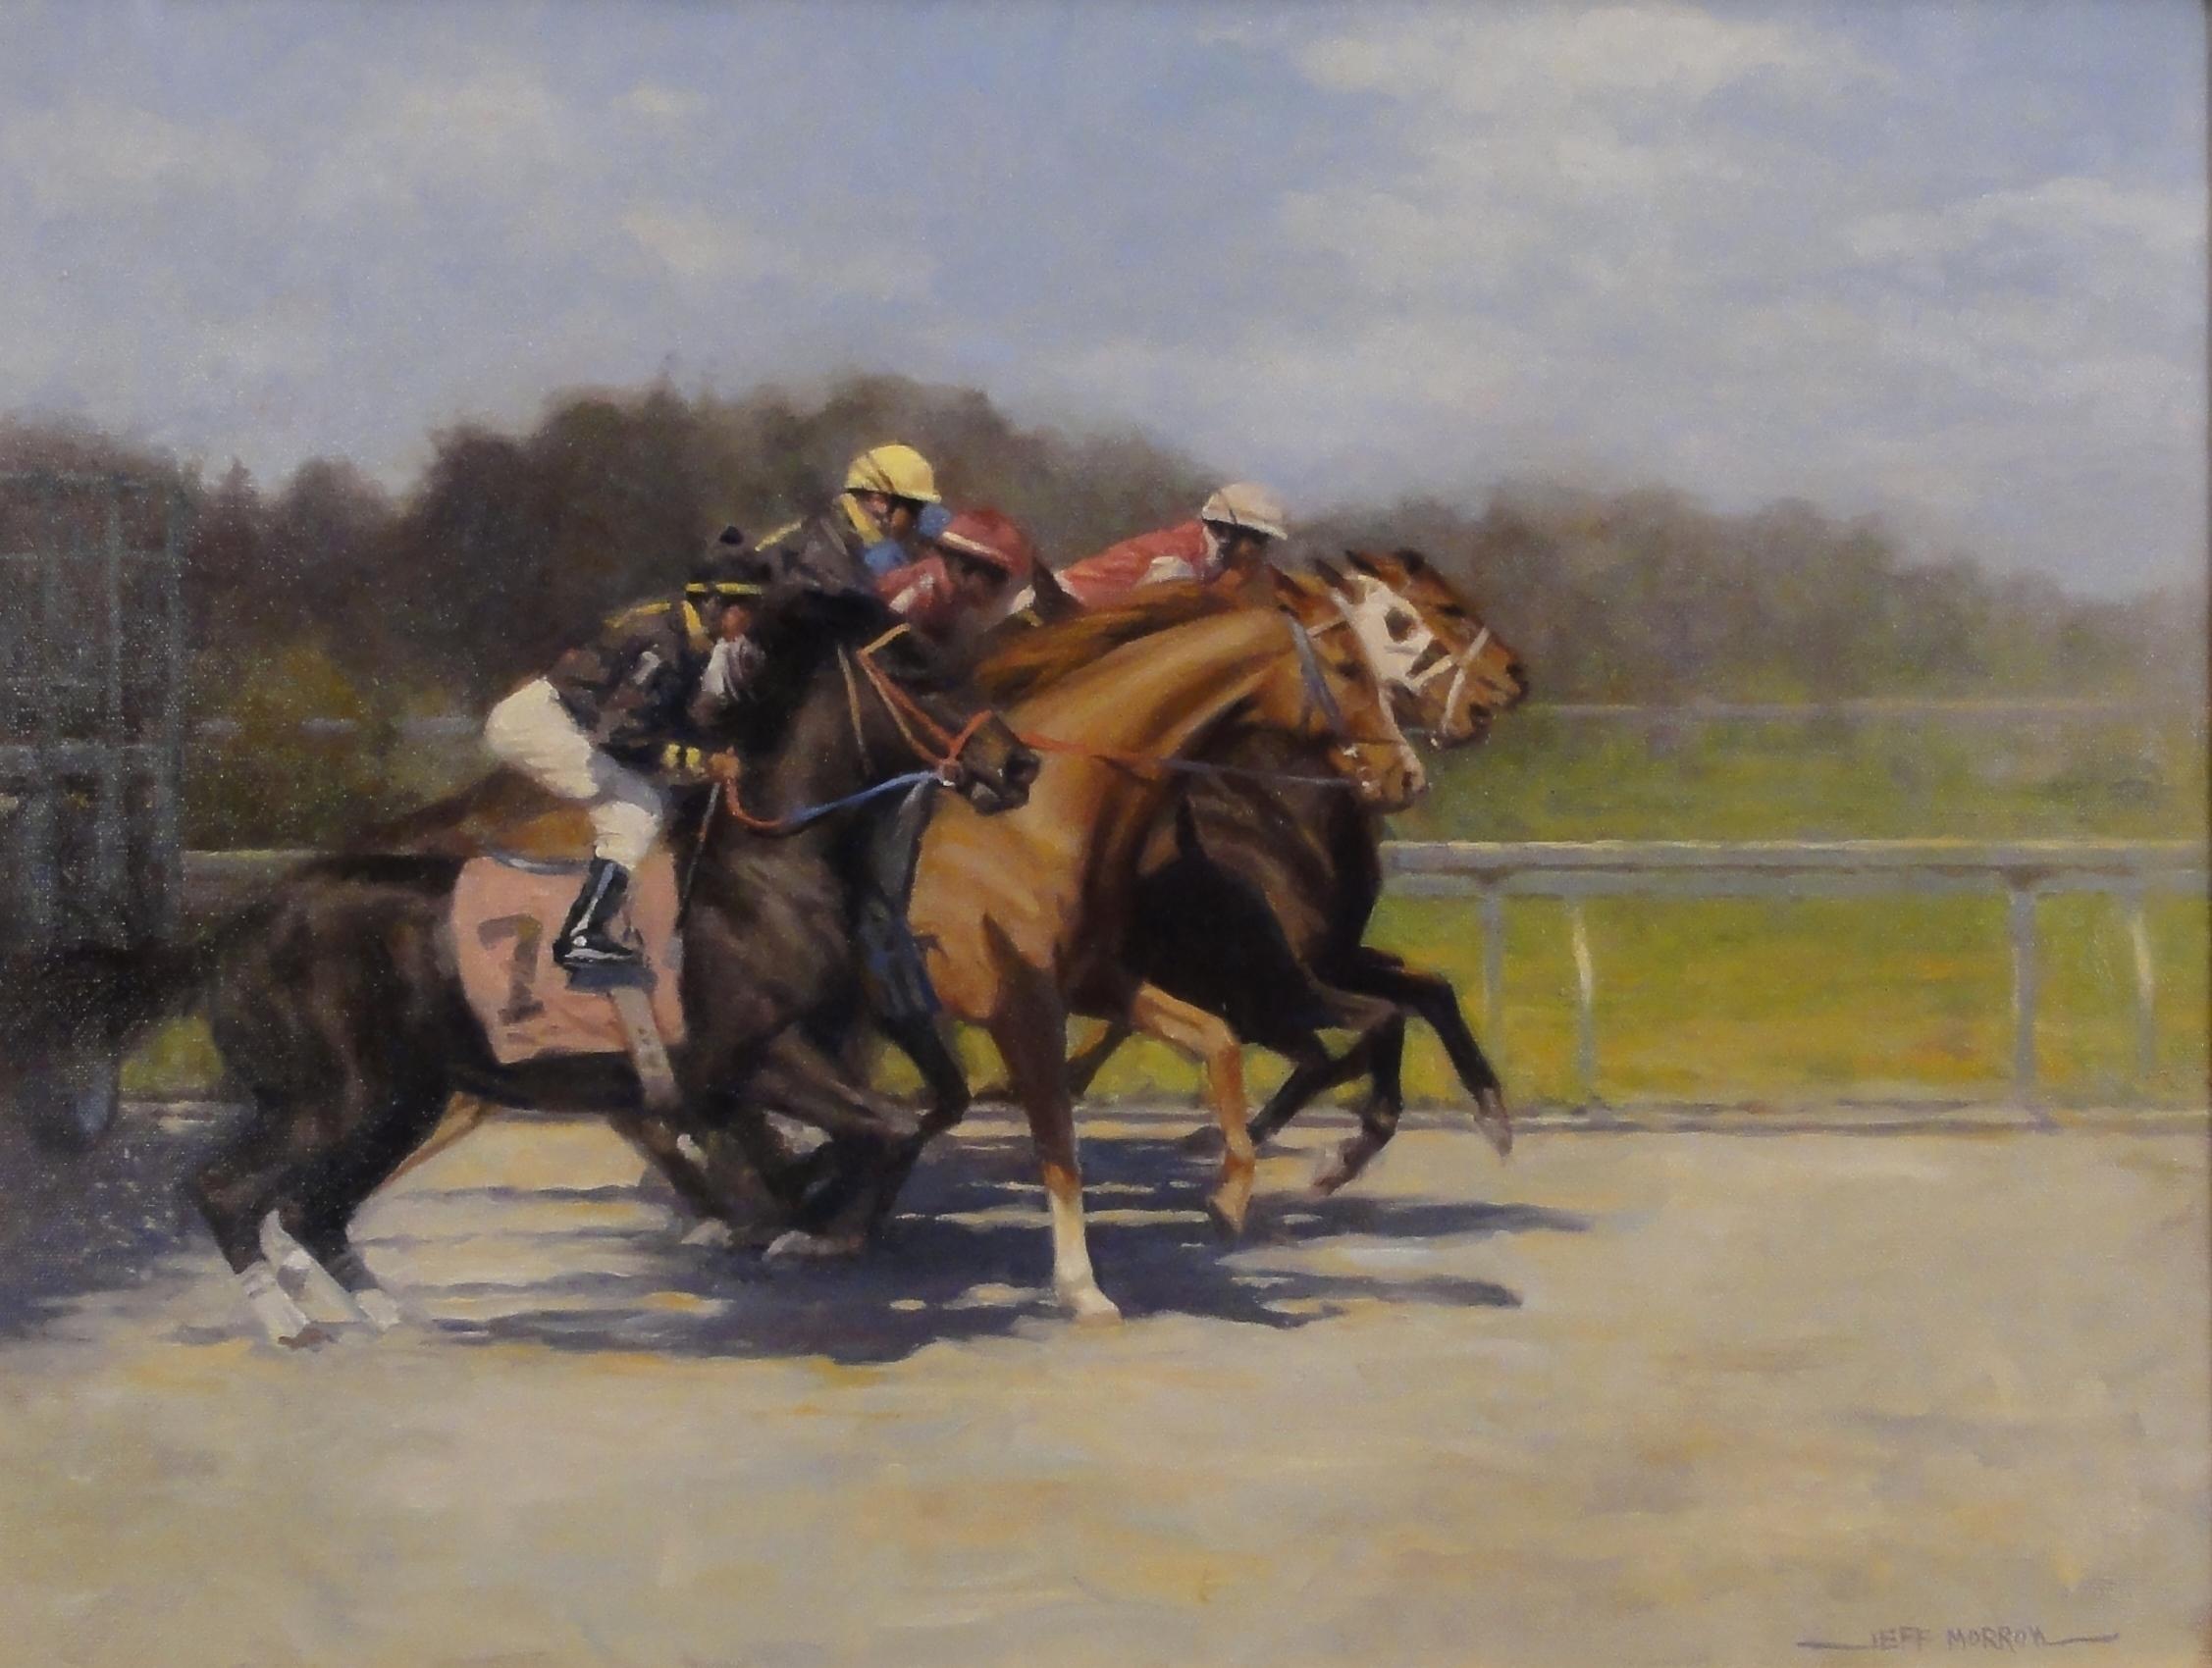 And They're Off - Painting by Jeff Morrow